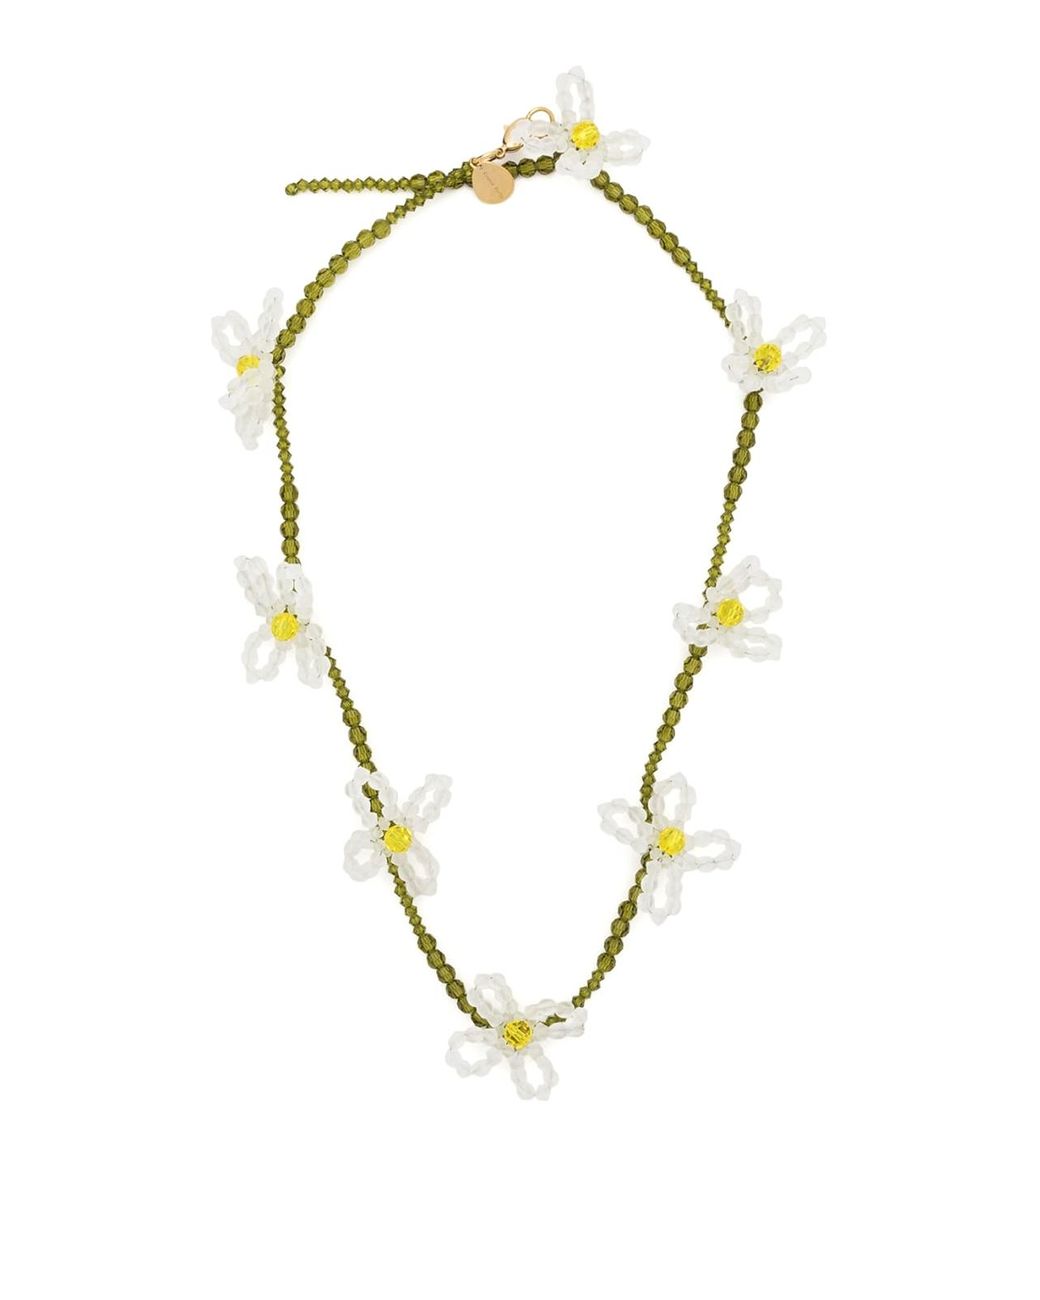 Colorful Flower Protection Beads Necklace For Girls Wind Alloy Crystal Drop  Delivery Jewelry Pendant DHXPD From Bdegarden, $1.49 | DHgate.Com